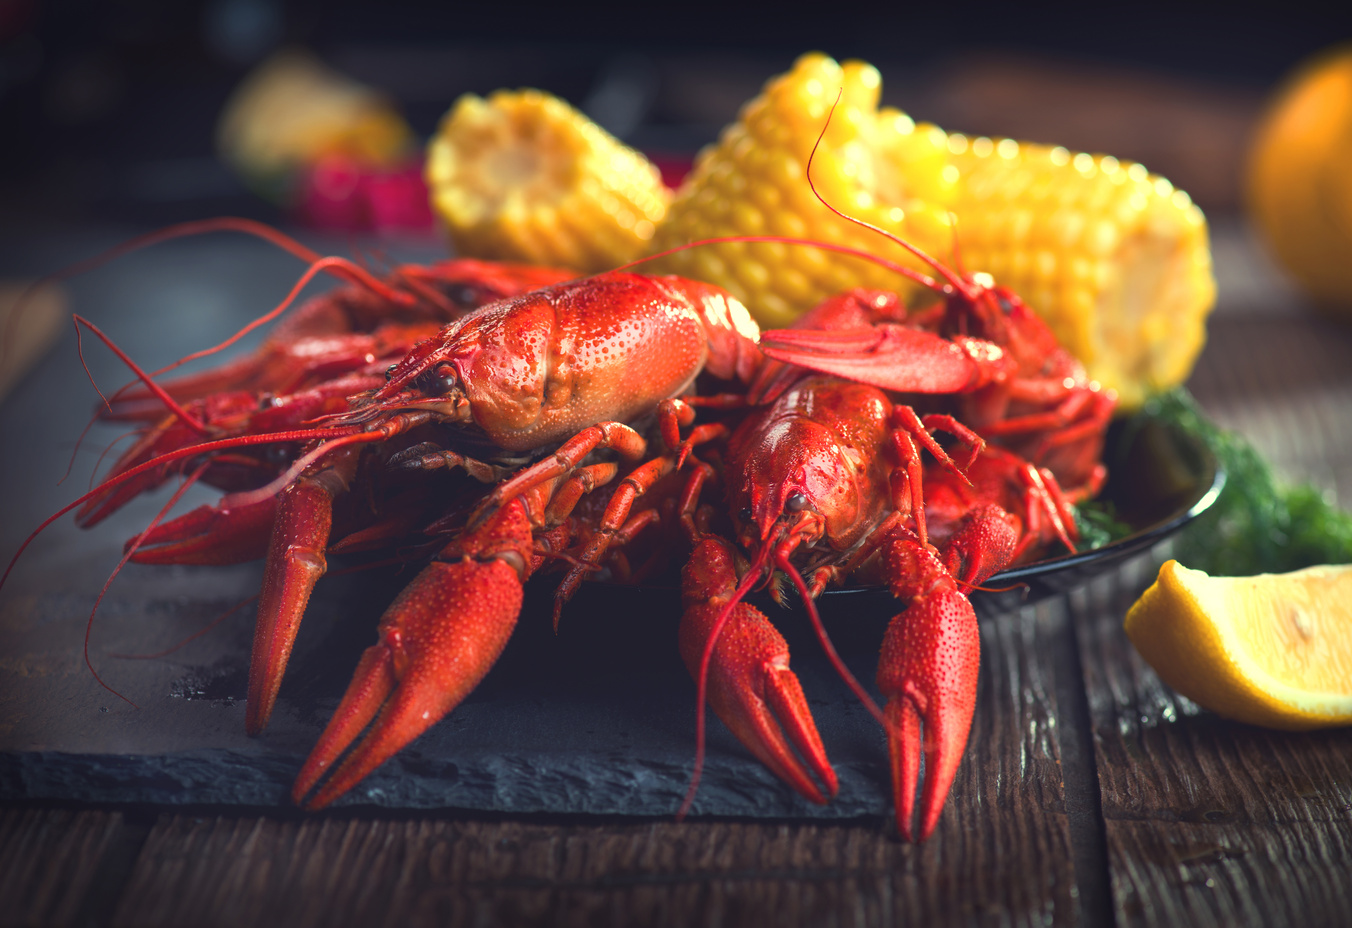 Crayfish. Creole Style Crawfish Boil Serving with Corn and Potat